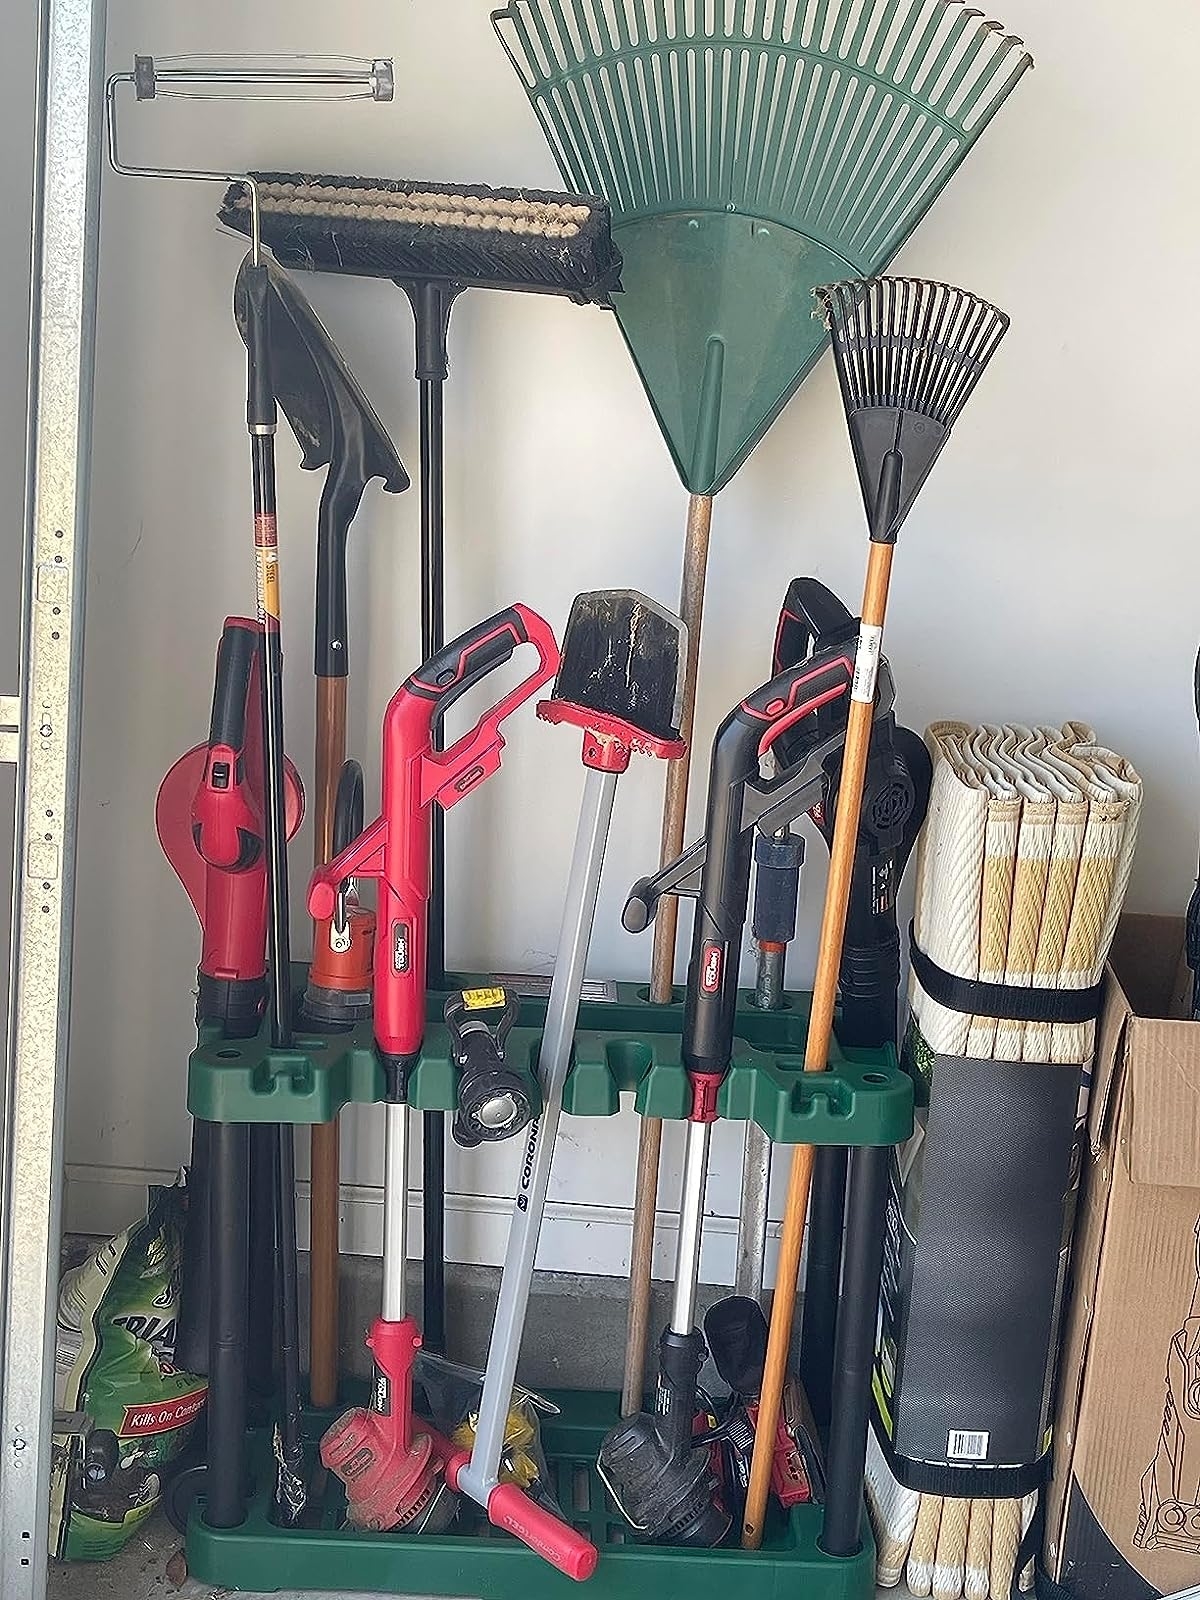 Reviewer image of their garden tools in the organizer